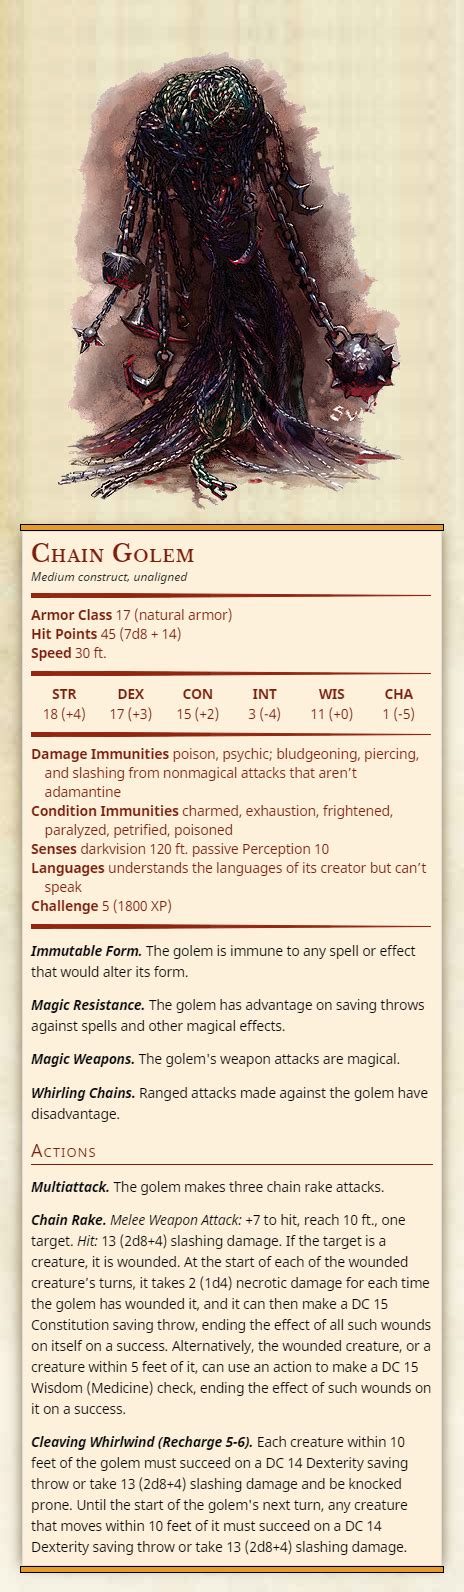 Dungeons And Dragons Classes Dungeons And Dragons Characters Dungeons